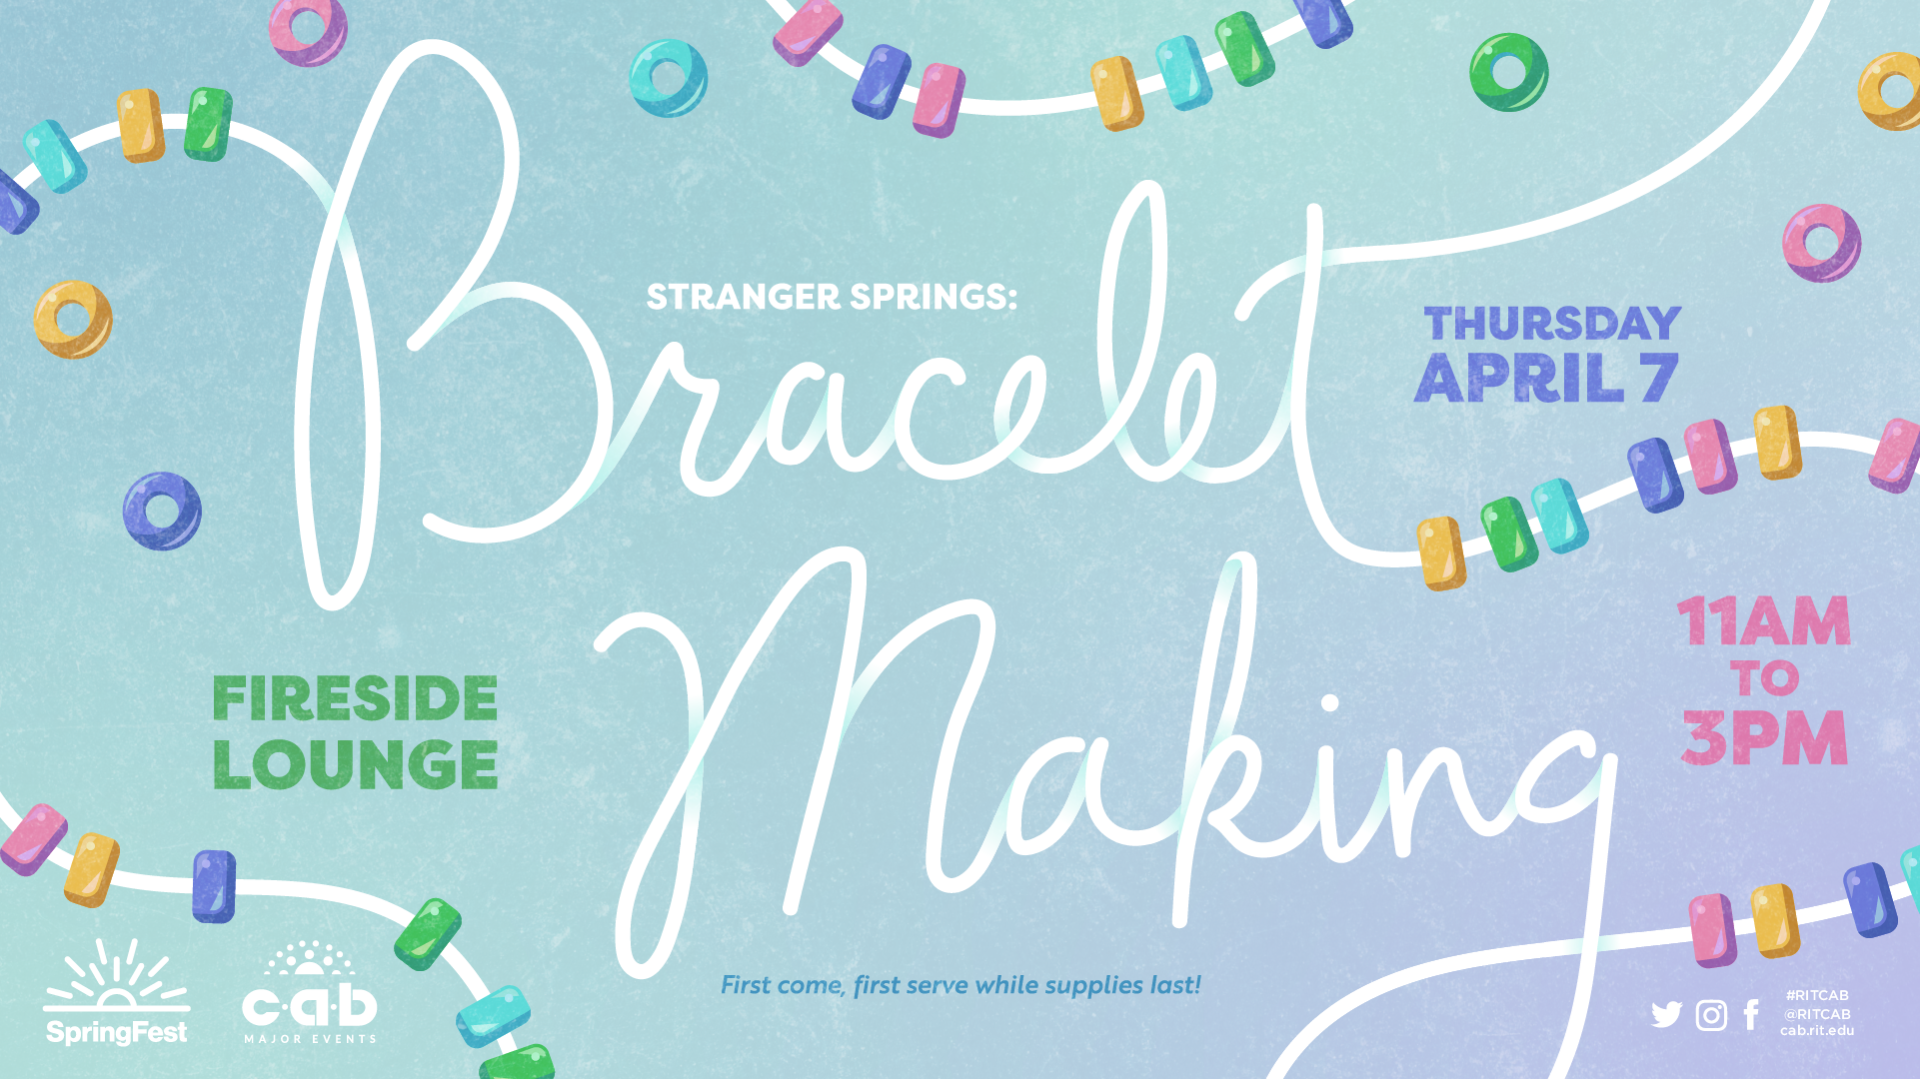 RIT SpringFest Presents: Bracelet Making. It will take place on Thursday, April 7, 2022 from 11 AM - 3 PM in the Fireside Lounge